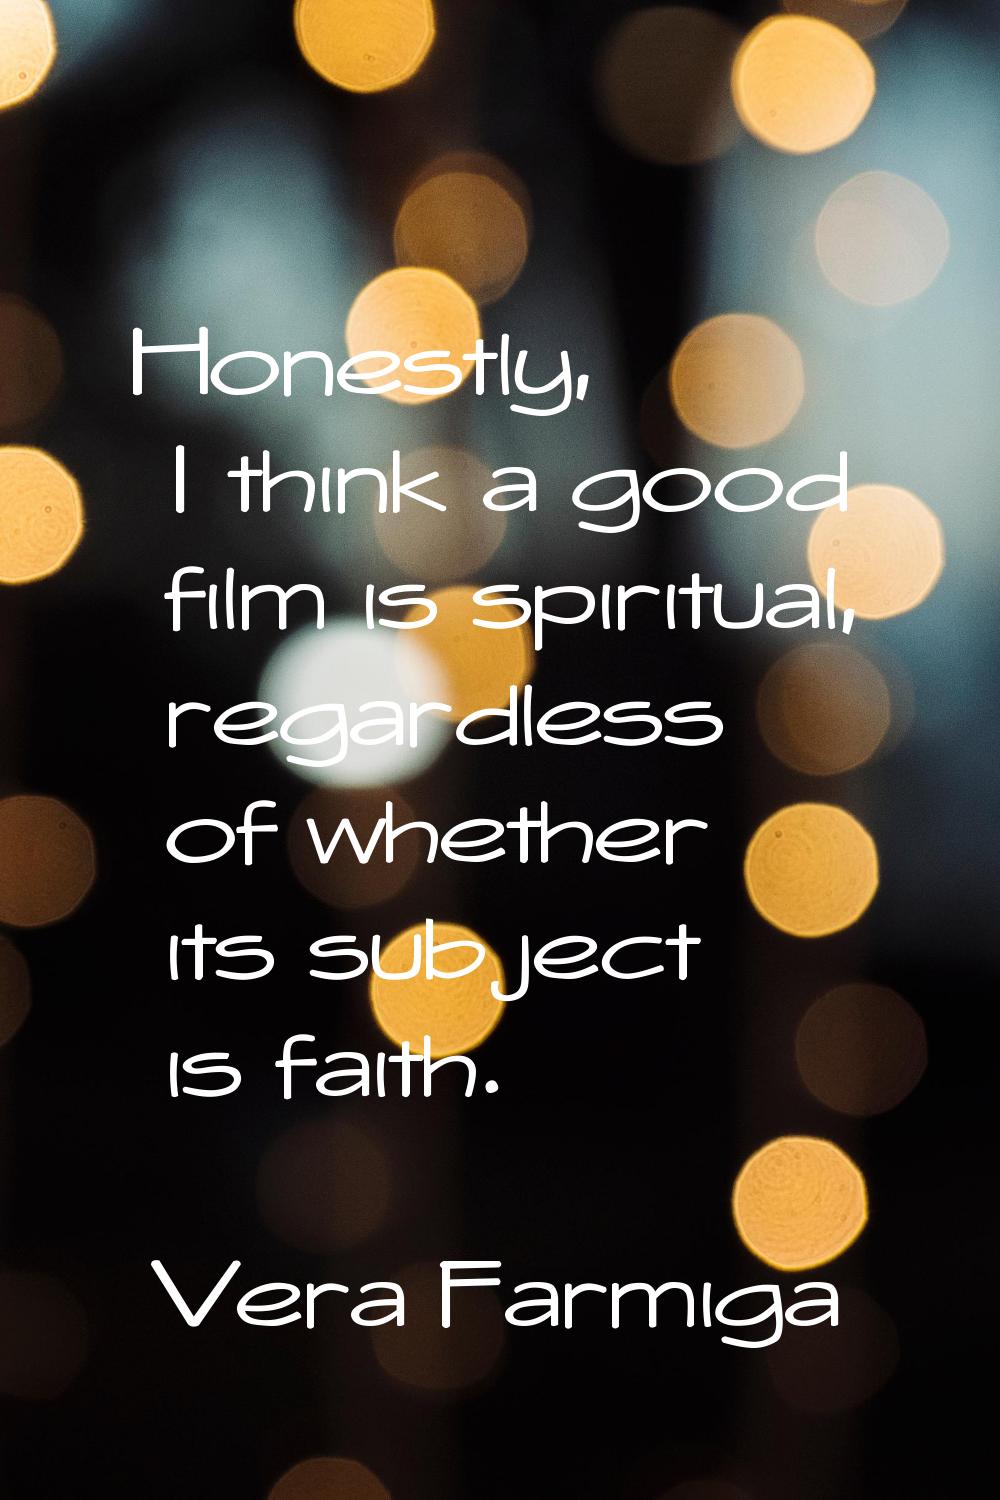 Honestly, I think a good film is spiritual, regardless of whether its subject is faith.